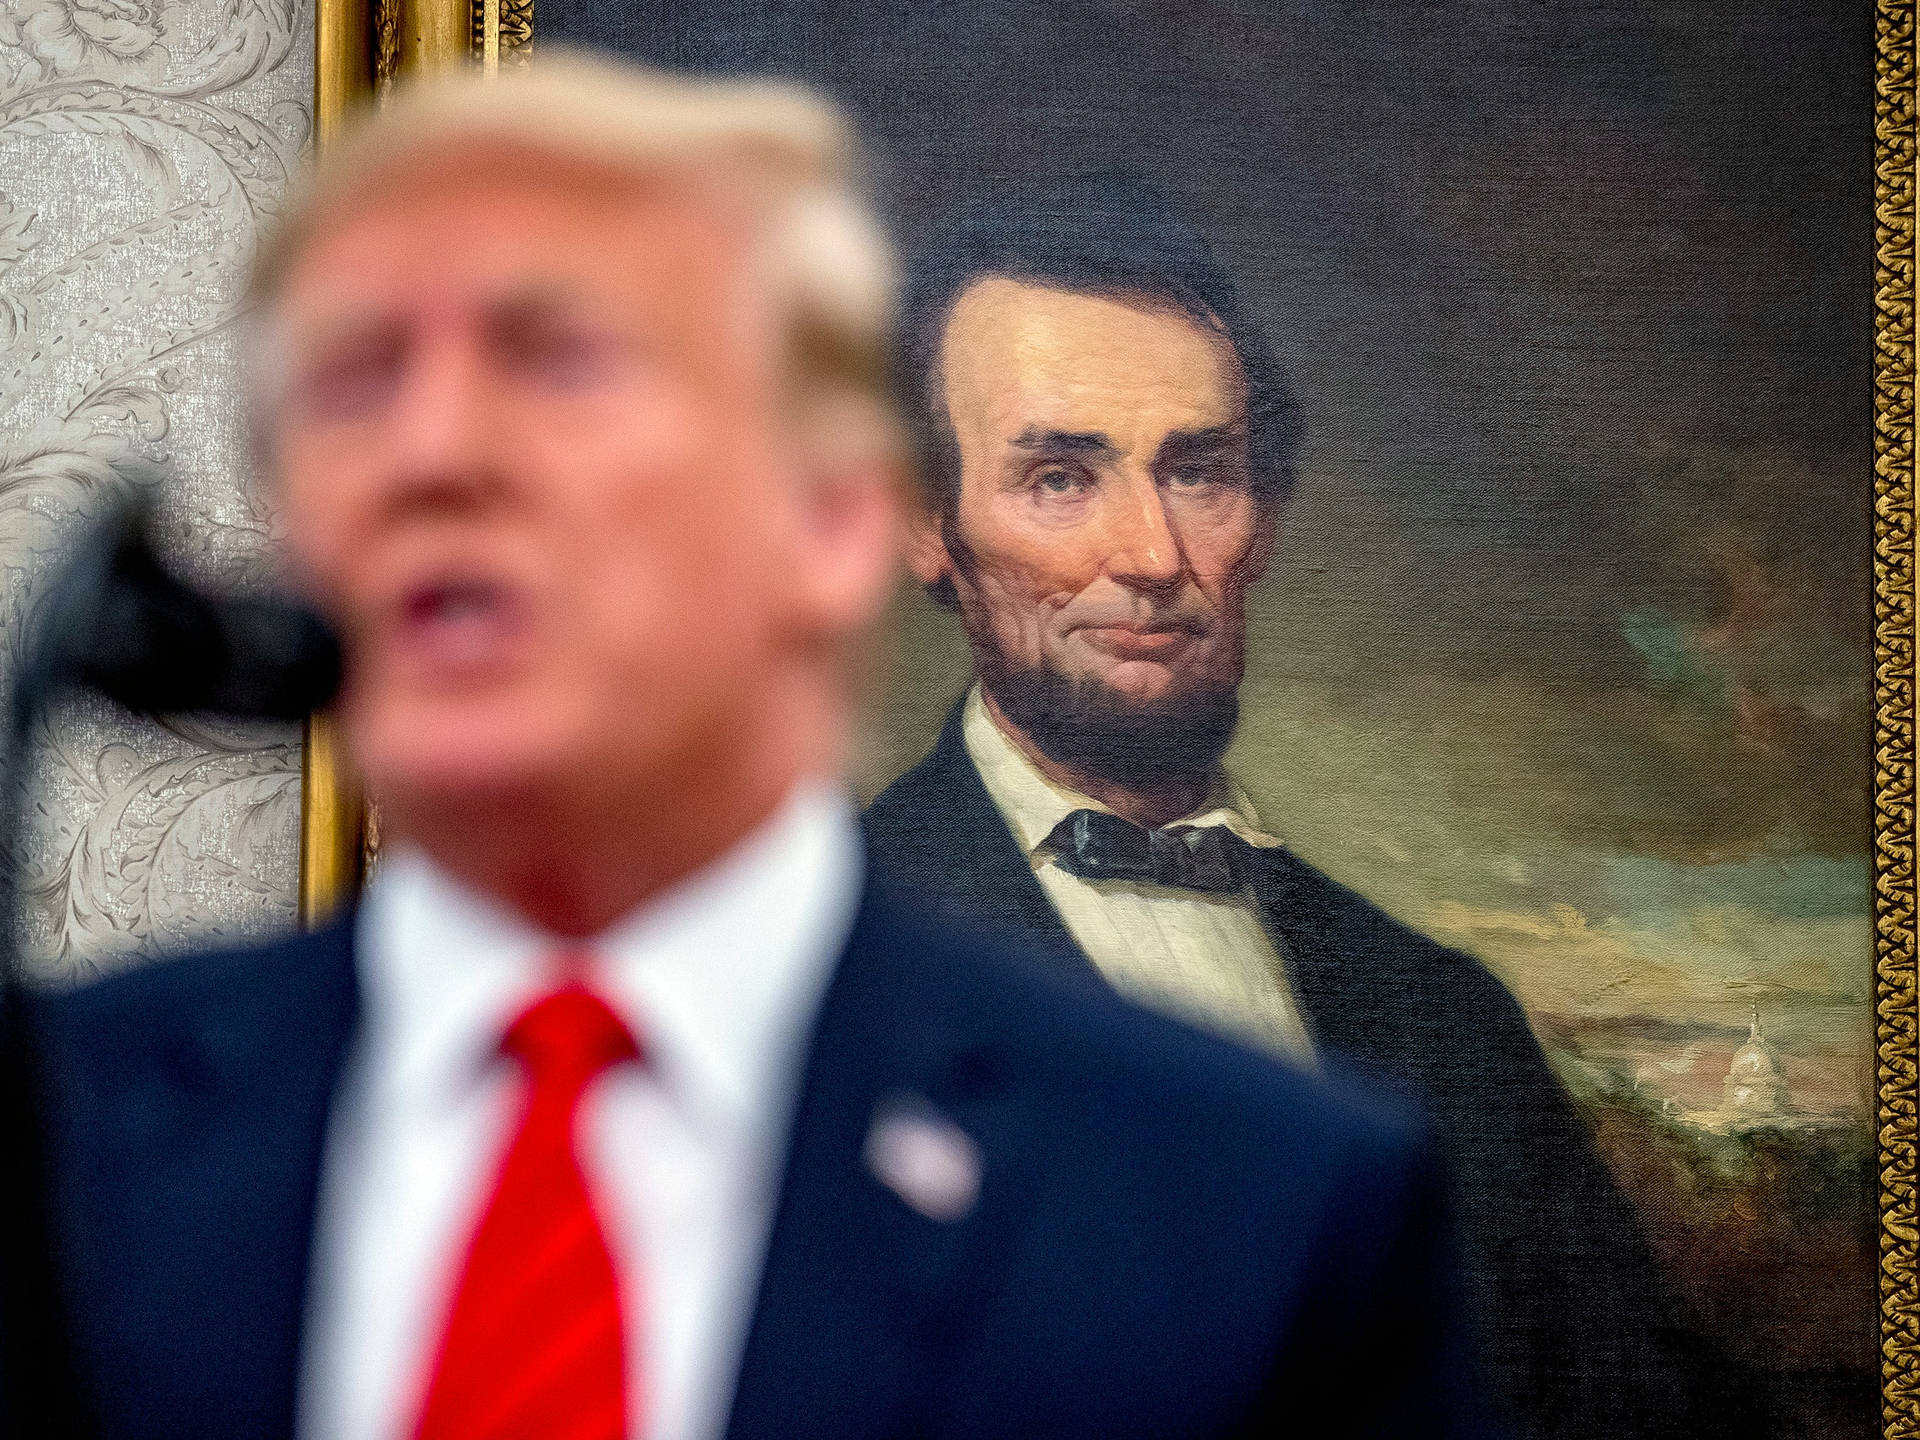 Abraham Lincoln Portrait Painting With Former President Trump Wallpaper